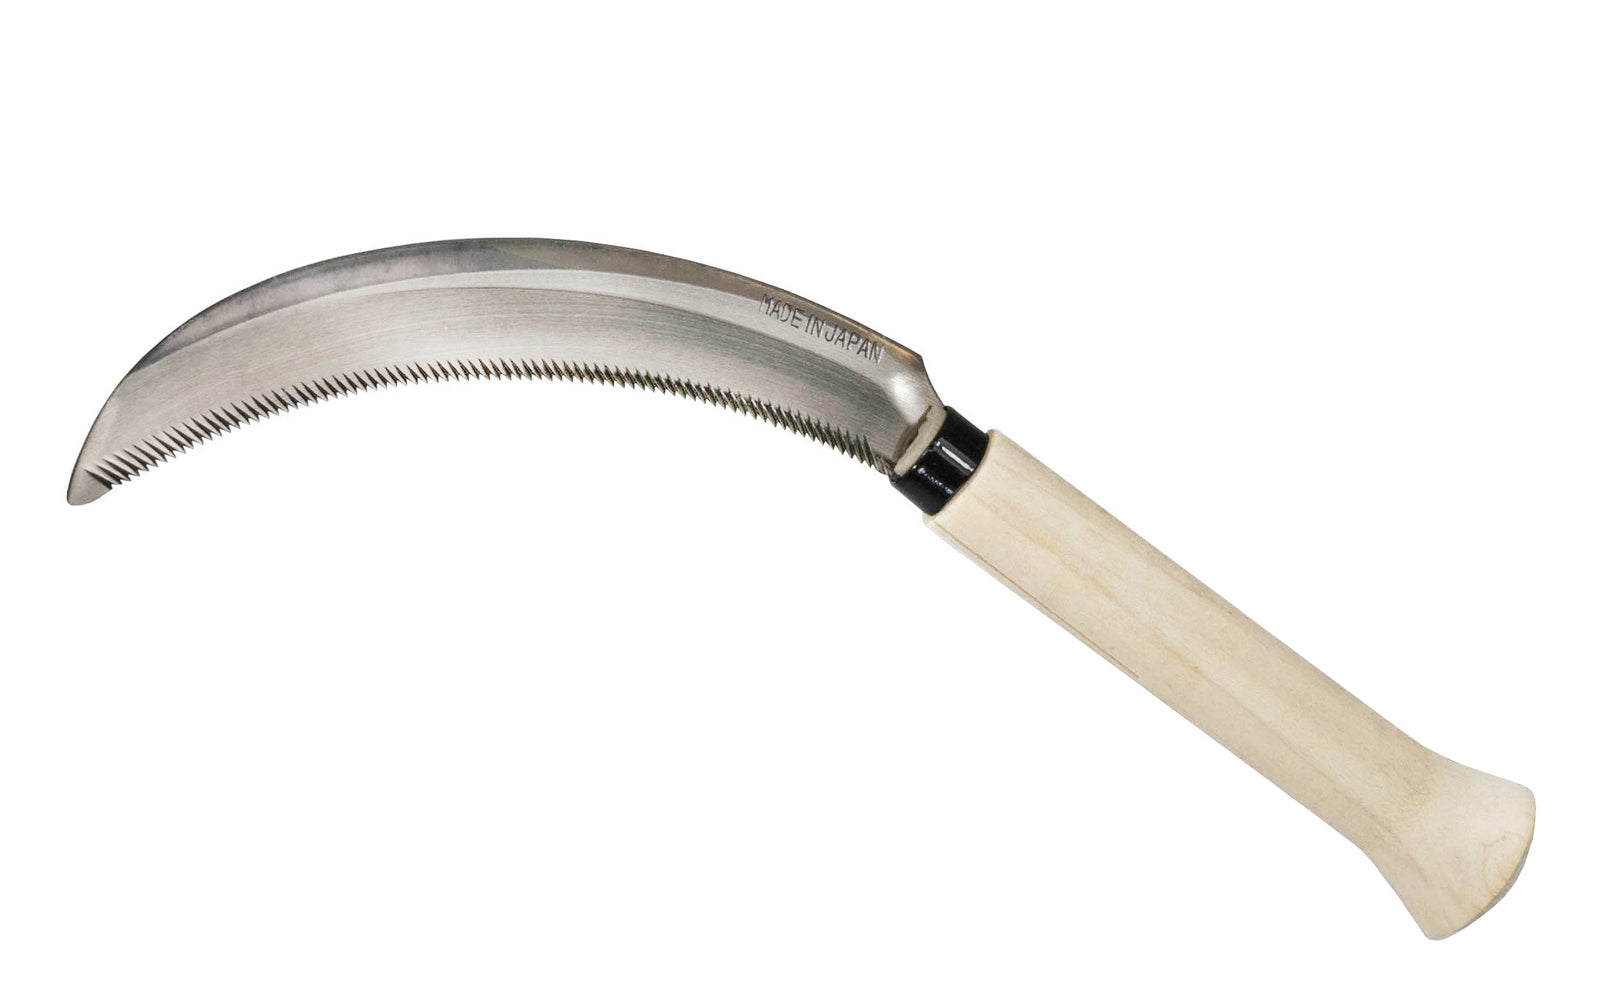 Traditional Japanese Nokogama flared handle hand-sickle great for outdoor landscaping needs. Made of high carbon steel, the blade of this weeder is very sharp with aggressive teeth & the blade is slightly curved for fast aggressive cutting. Noko Gama sickle will cut grasses, tough weeds, sod & turf, roots, stems.